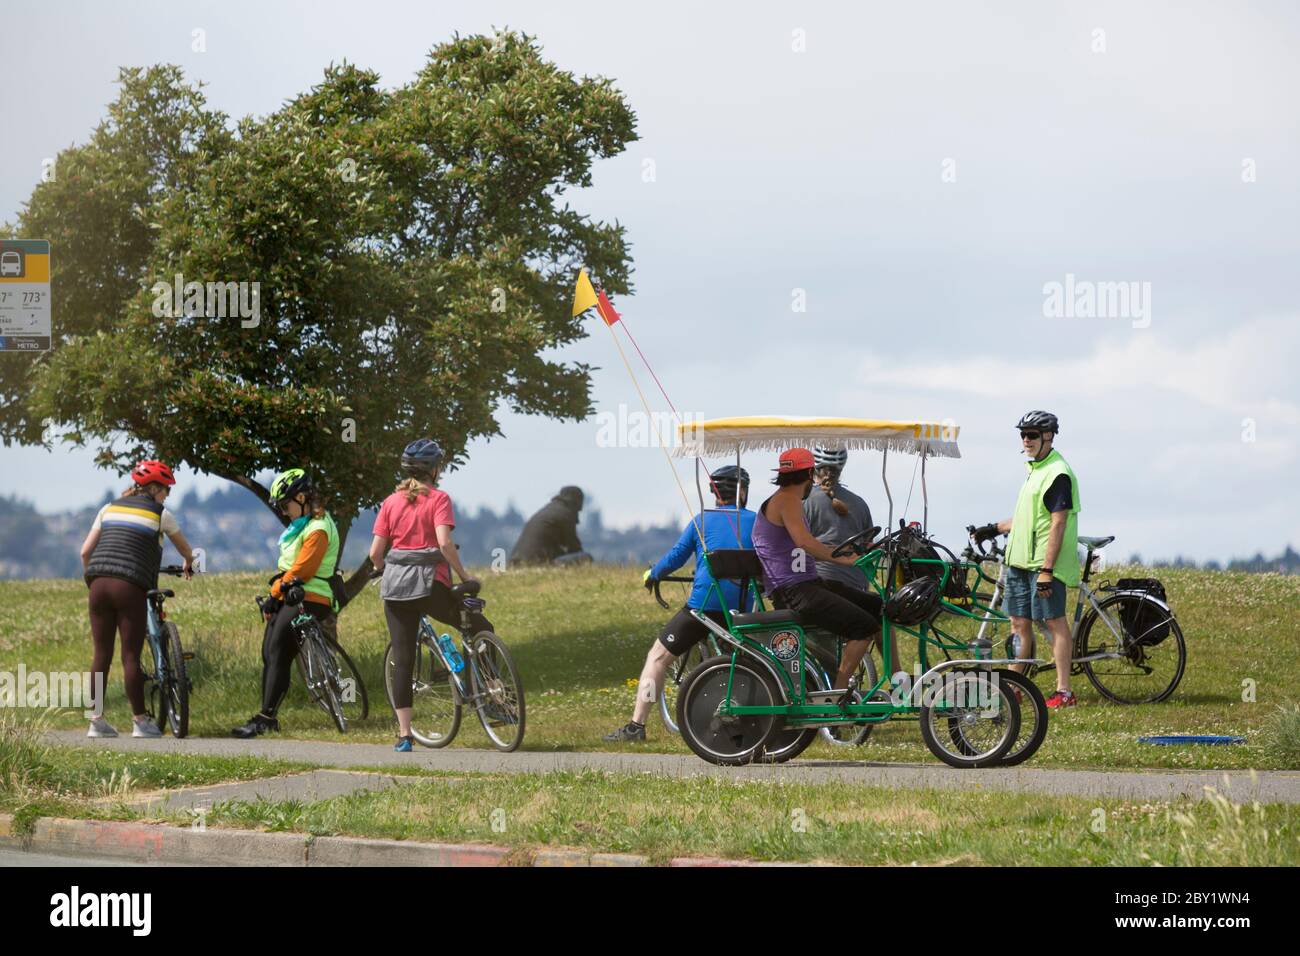 A group of cyclists gather along Alki Trail in Seattle, Washington as coronavirus pandemic restrictions are eased. As of Friday, June 5th, King County is now in modified Phase 1 as part of governor Jay Inslee's Safe Start reopening plan allowing for limited openings of recreational, social and business activities. Stock Photo